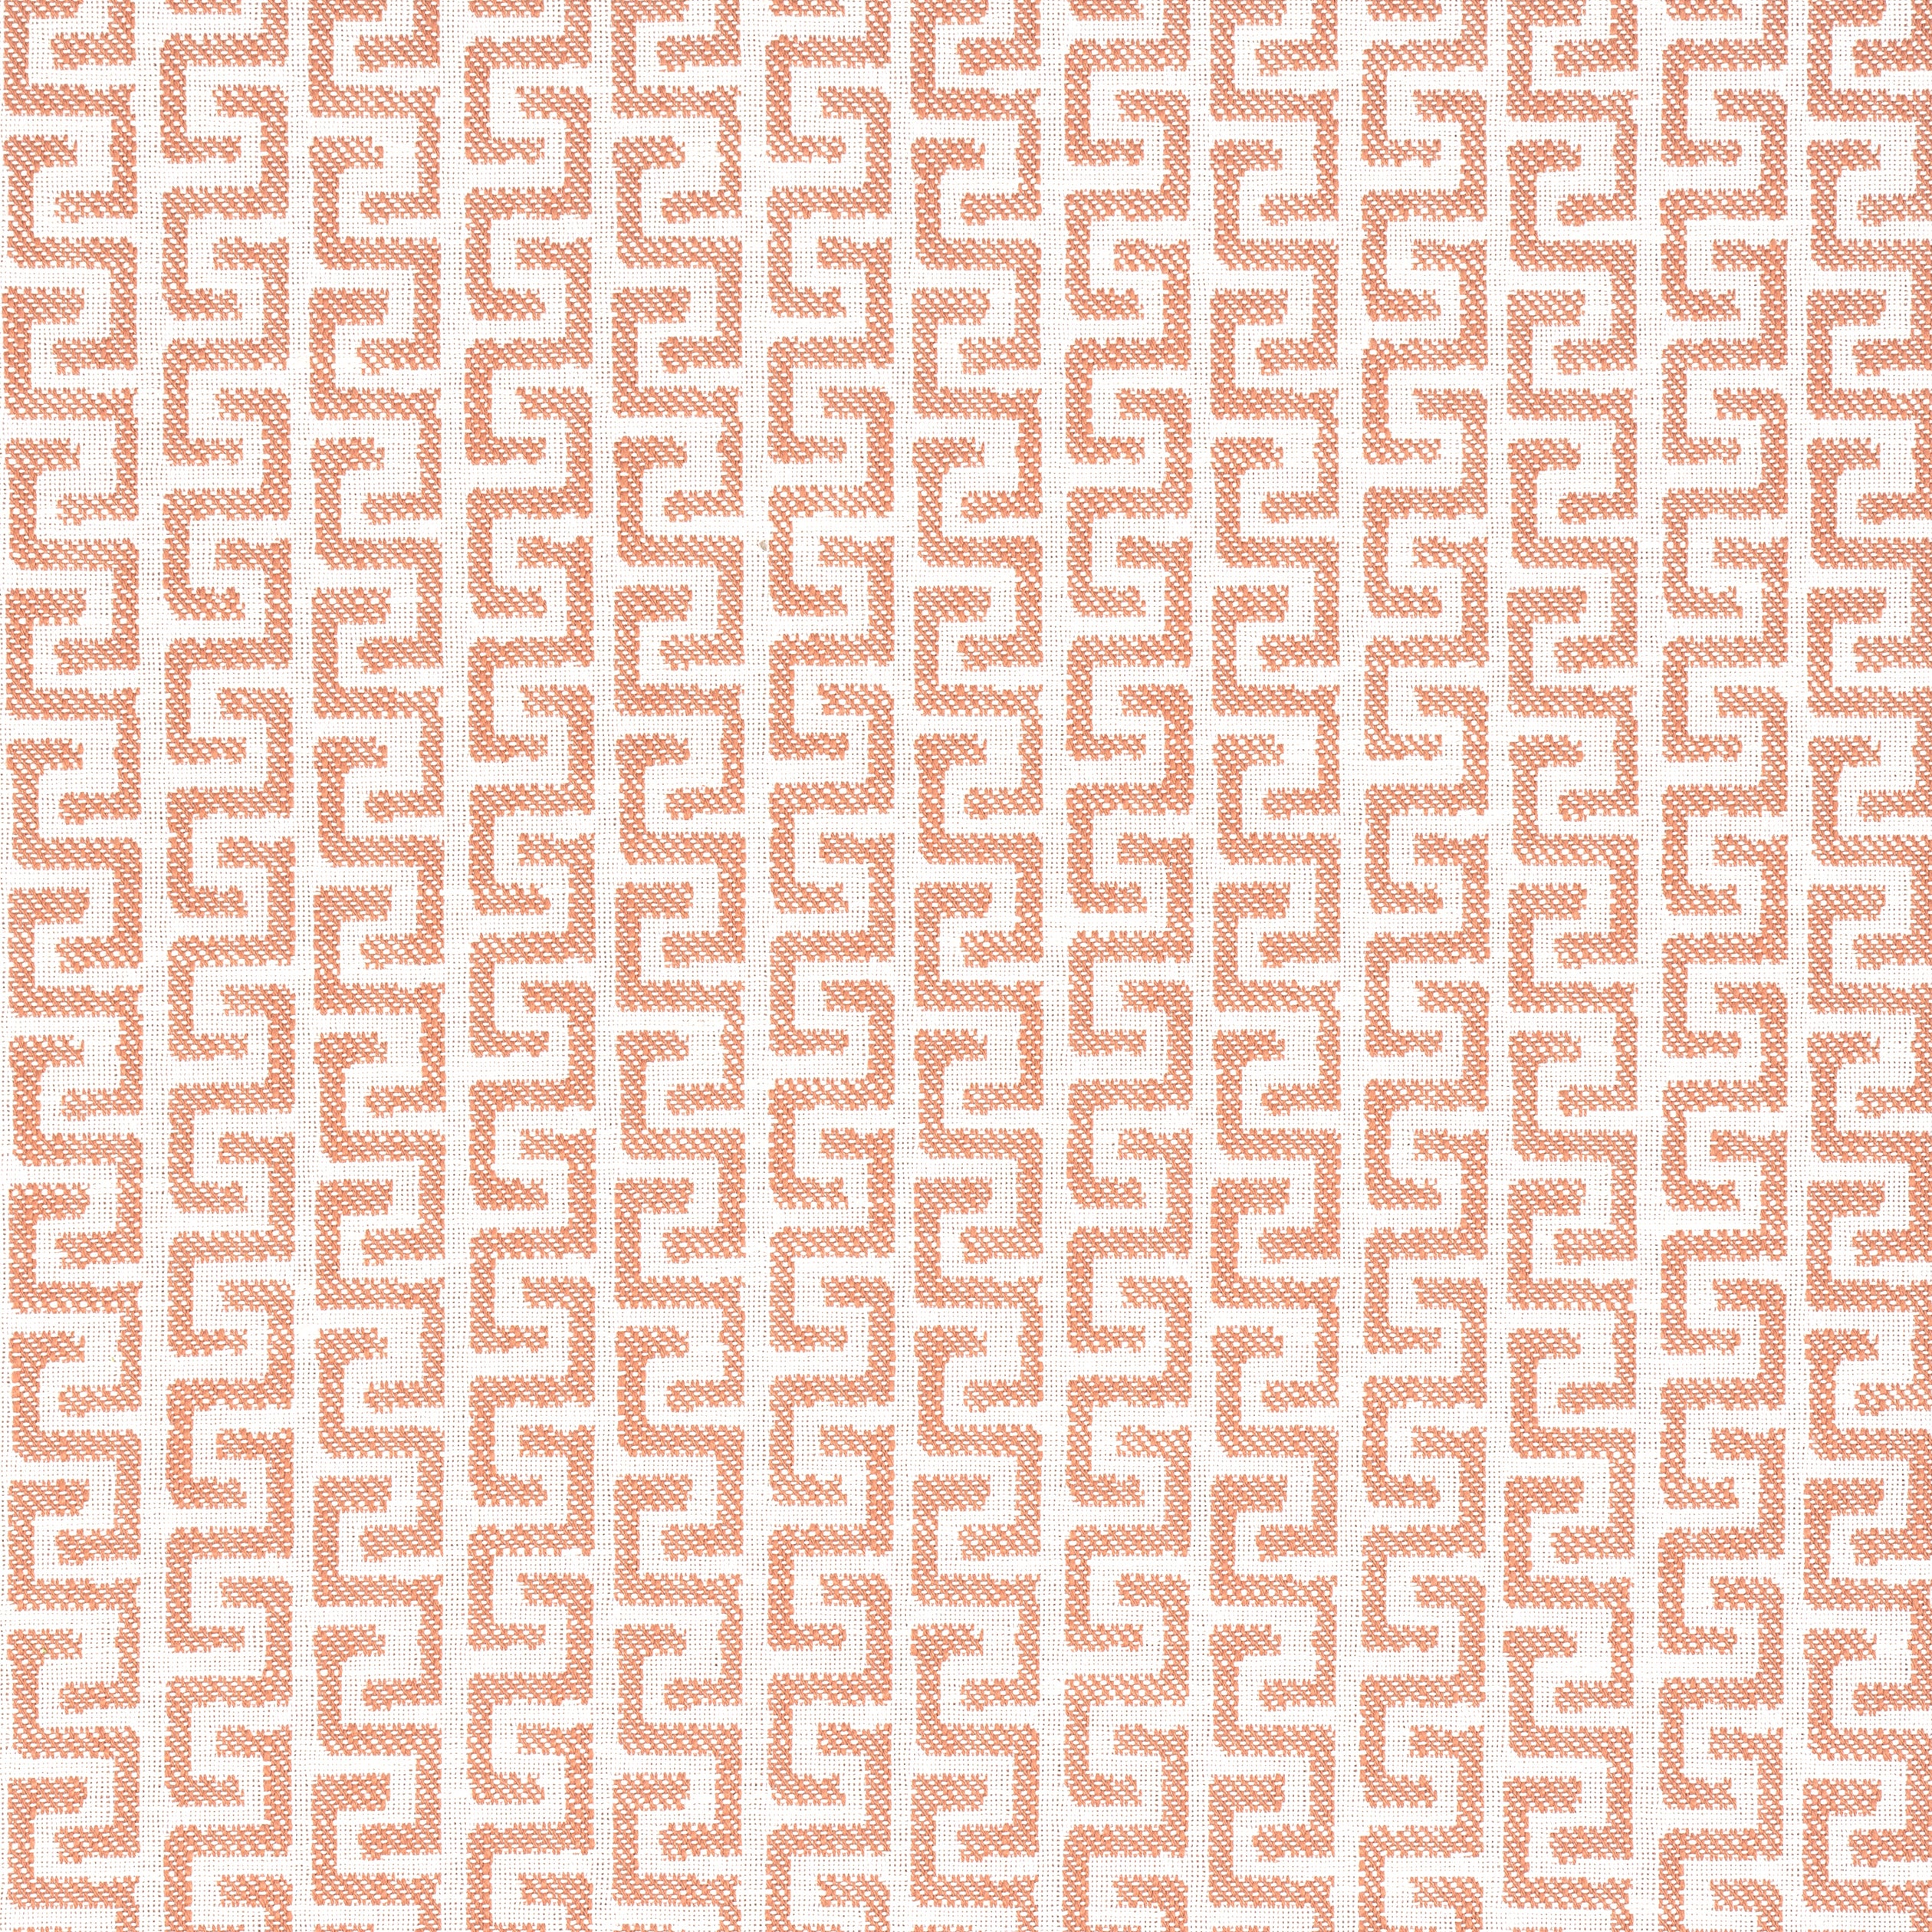 Merritt fabric in clay color - pattern number W74251 - by Thibaut in the Passage collection